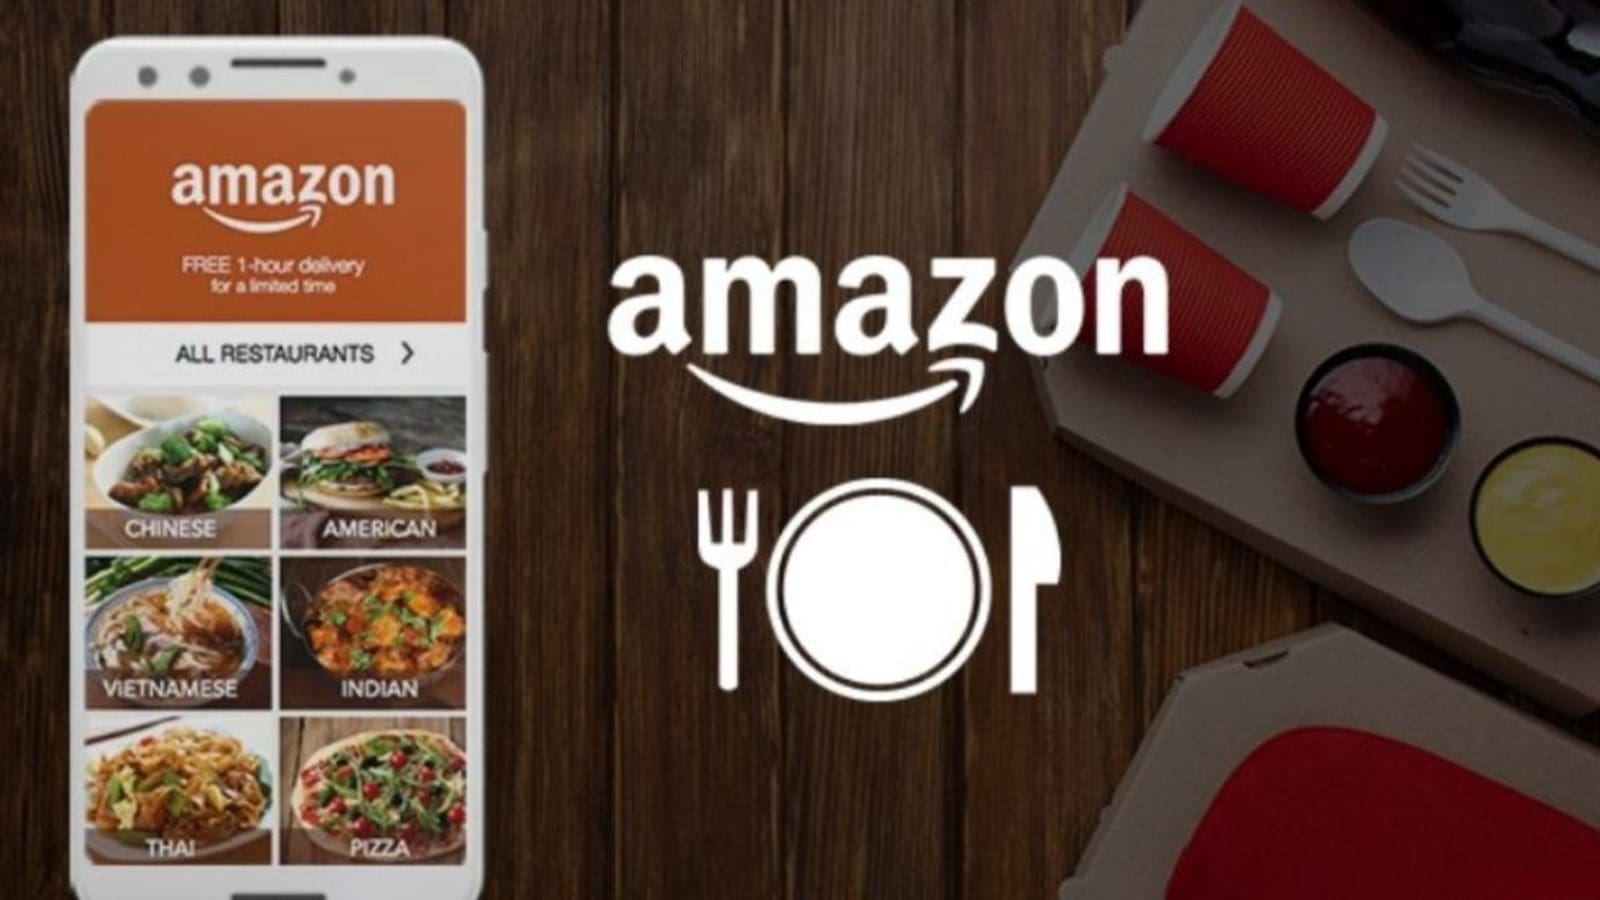 Amazon winds up food delivery business in India as part of broader restructuring process